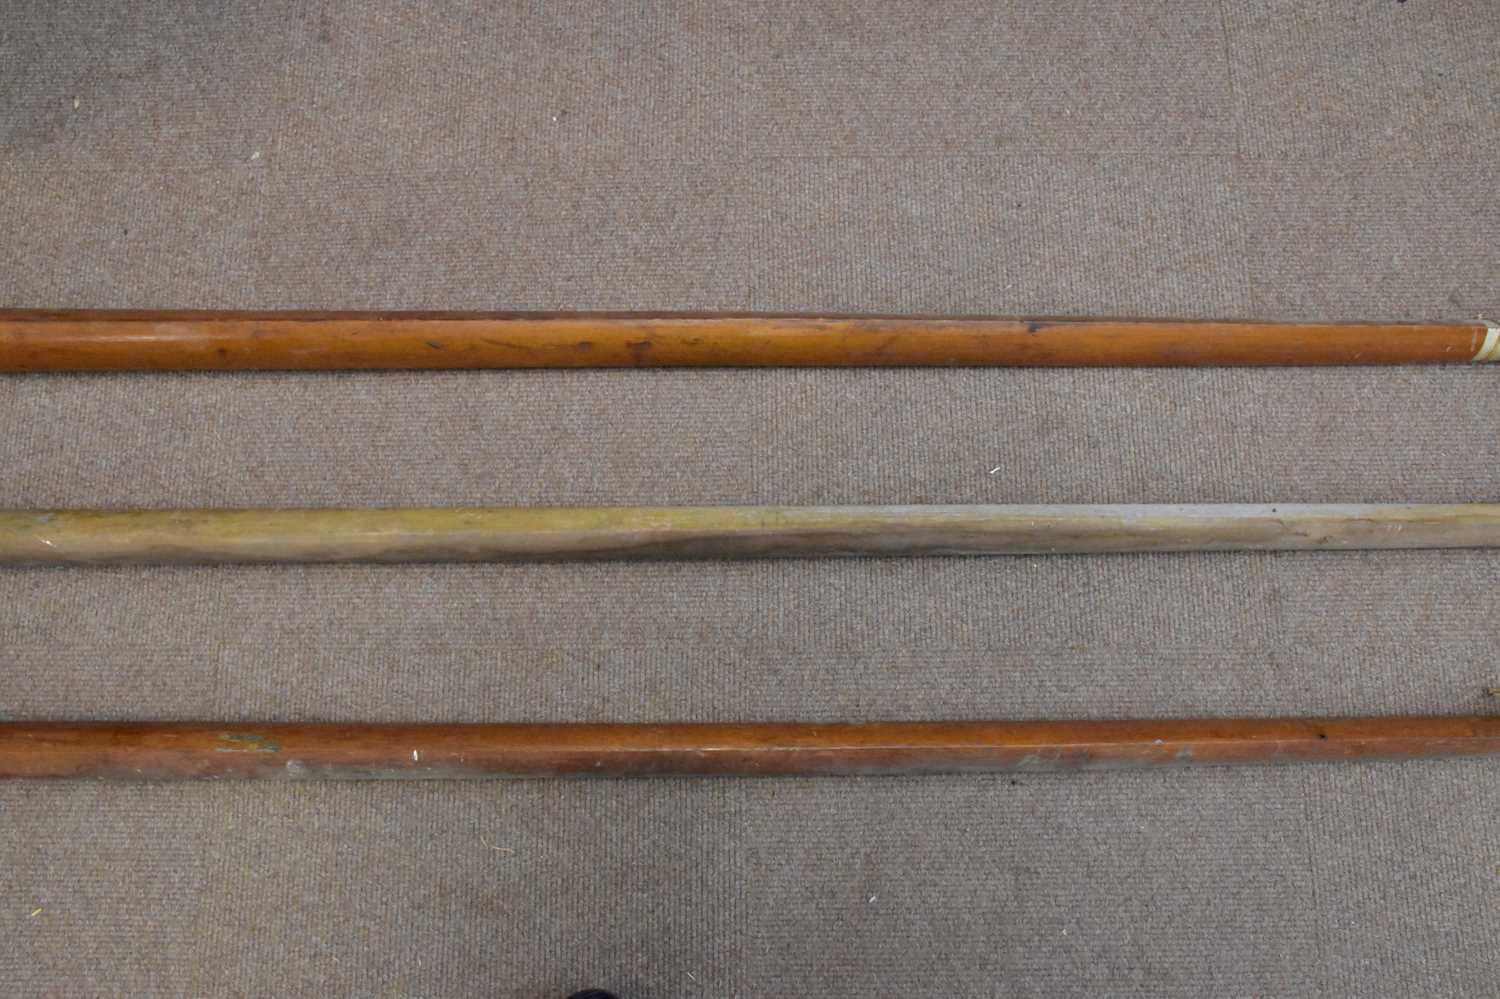 BALLIOL COLLEGE TORPID; three late 19th century named and dated college rowing oars, dated to - Image 2 of 3